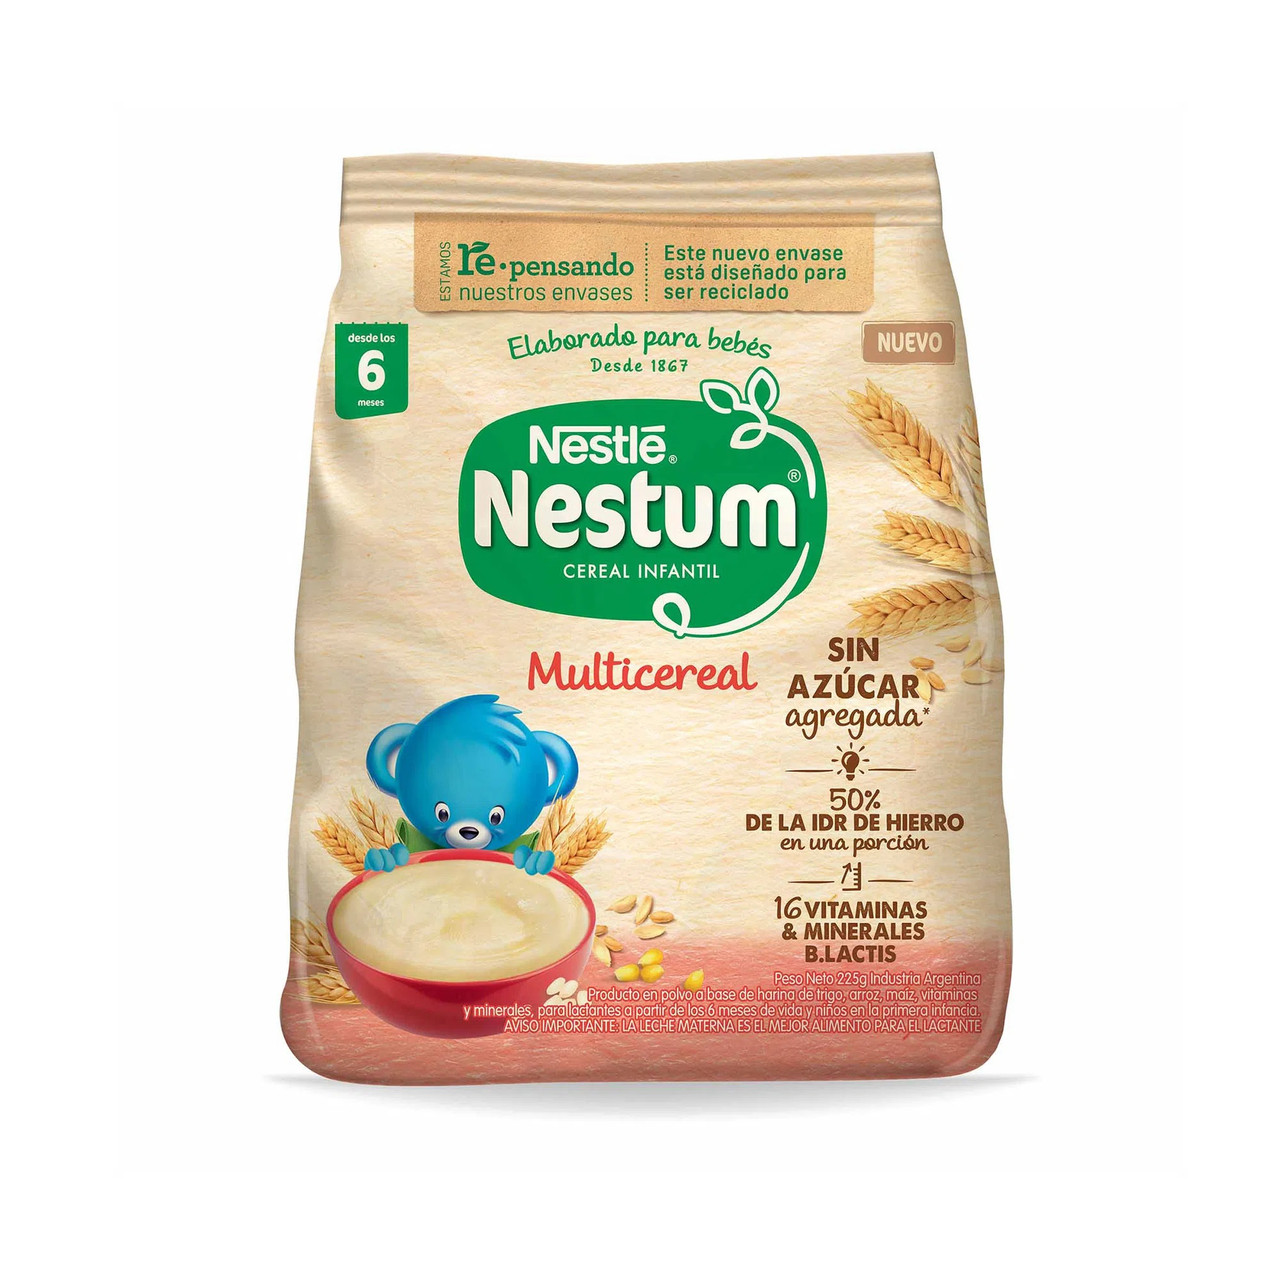 Nestum Cereal Infantil Multicereal Powder Ready To Make Baby Food Made With  Wheat Flour, Cereals 